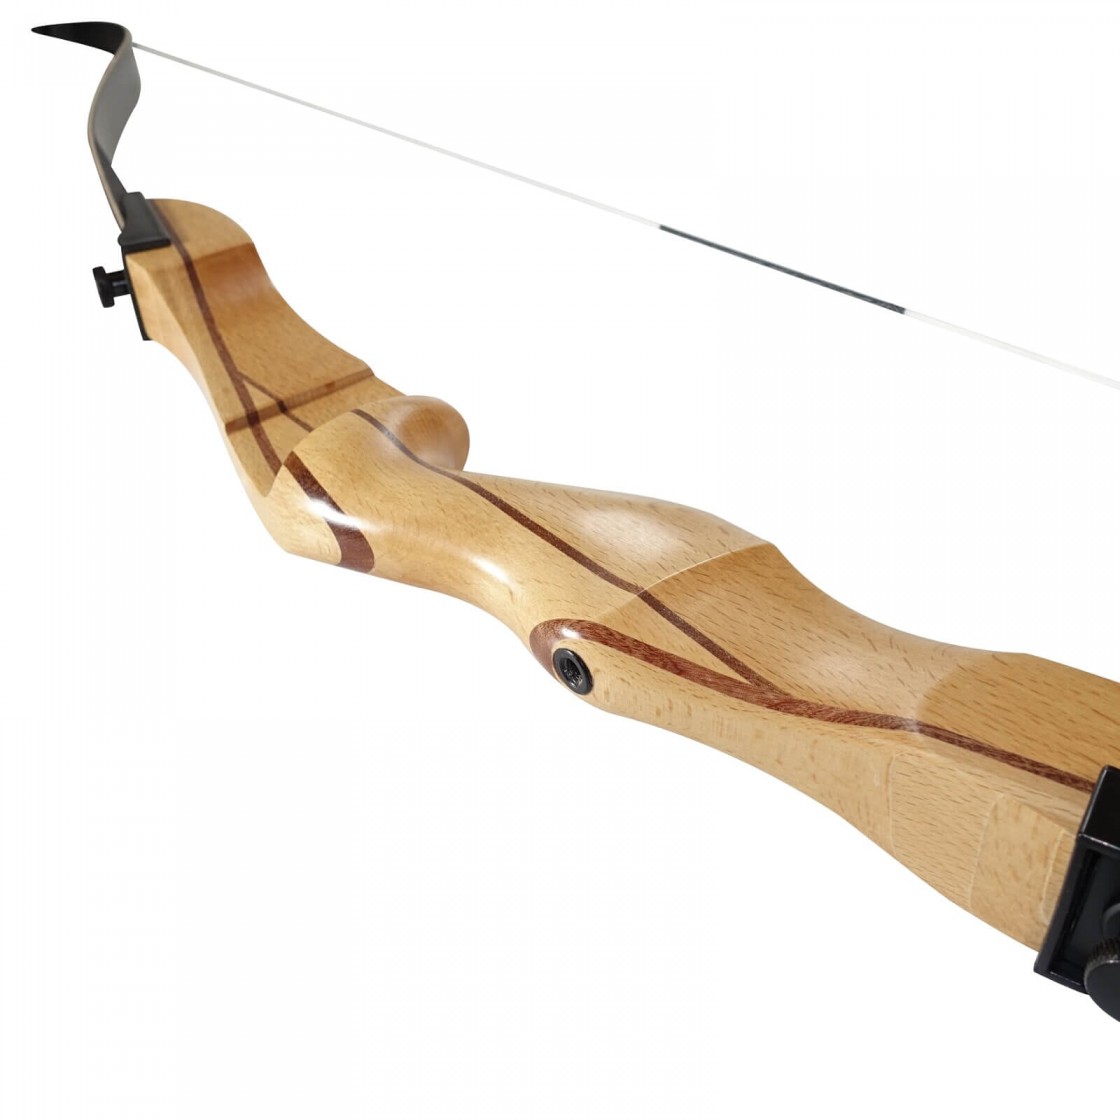 An Introduction To Junxing Adult Archery Recurve Bow